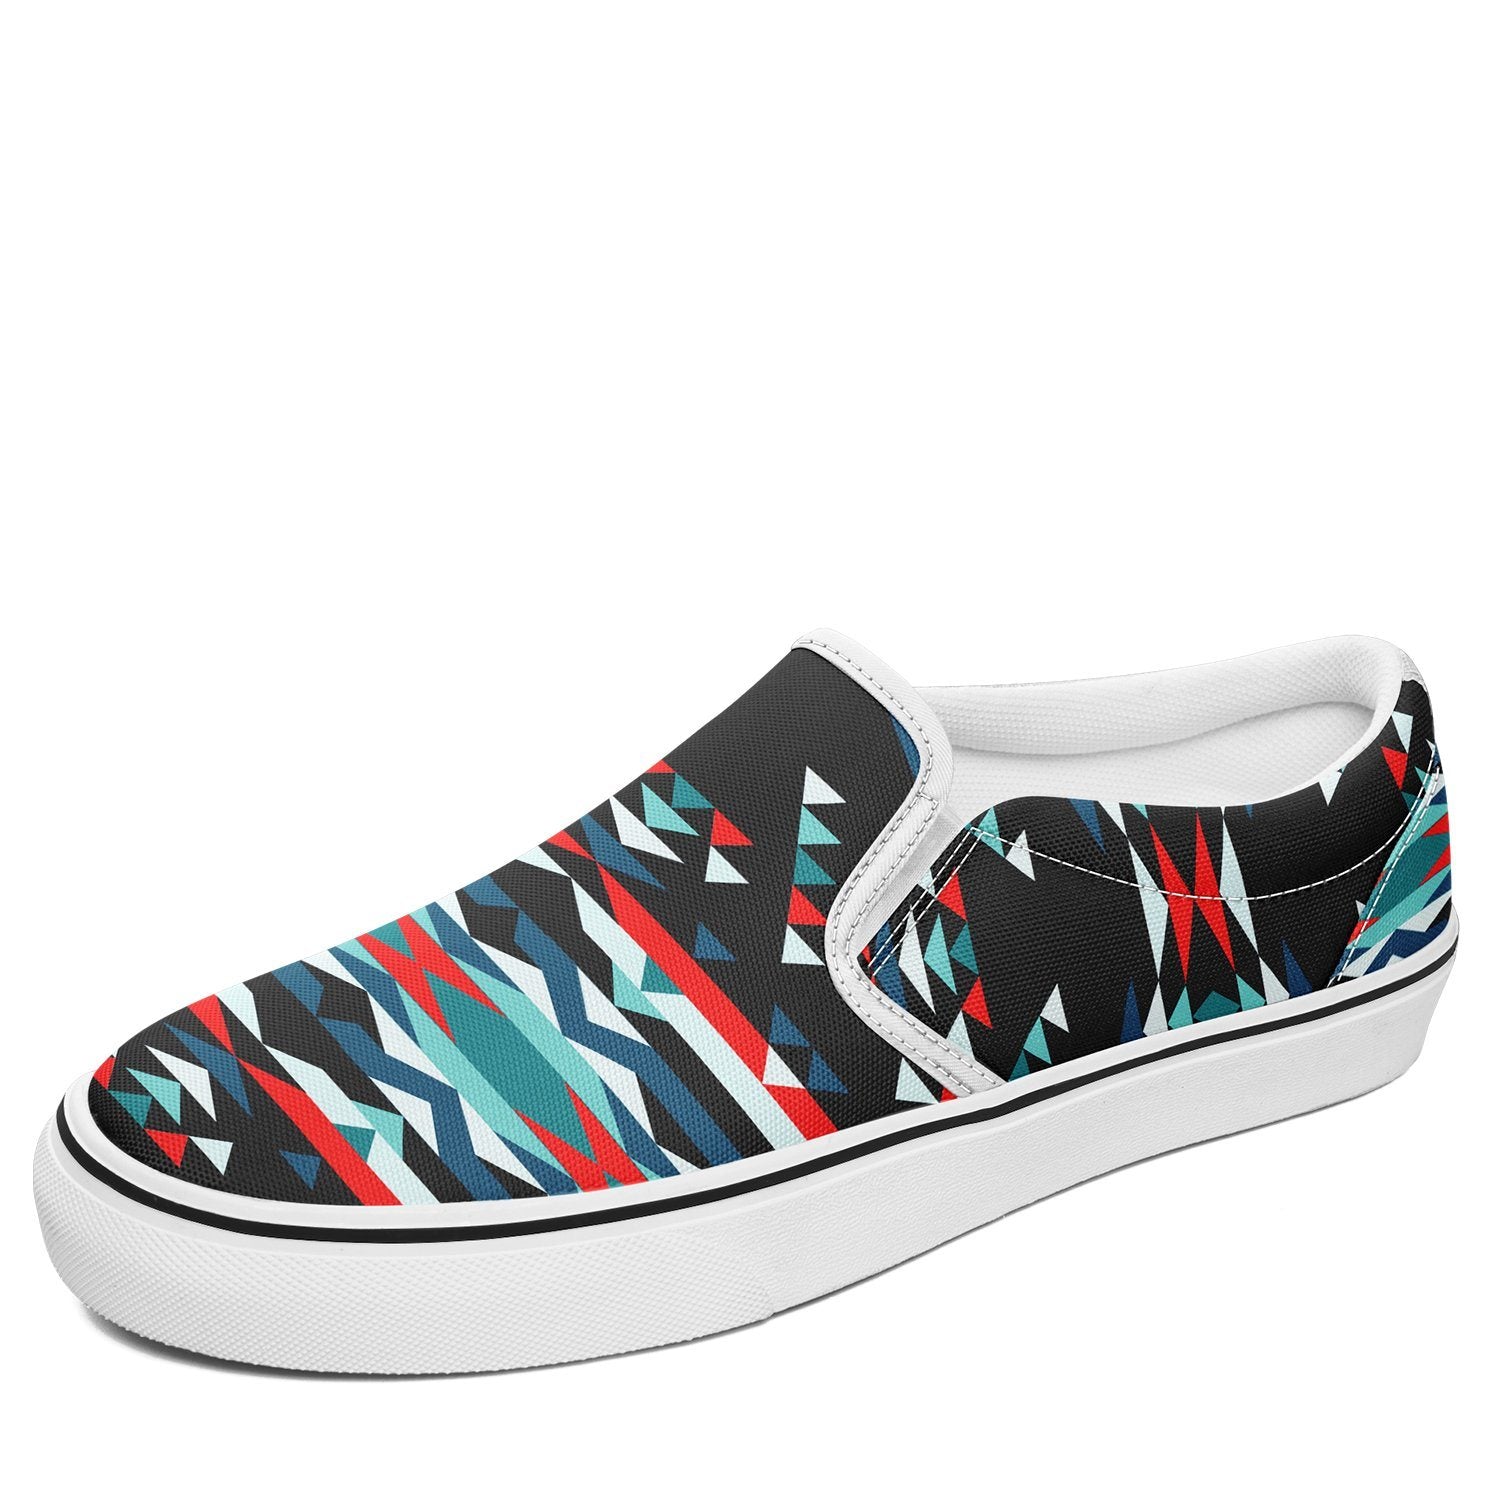 Visions of Peaceful Nights Otoyimm Canvas Slip On Shoes 49 Dzine 